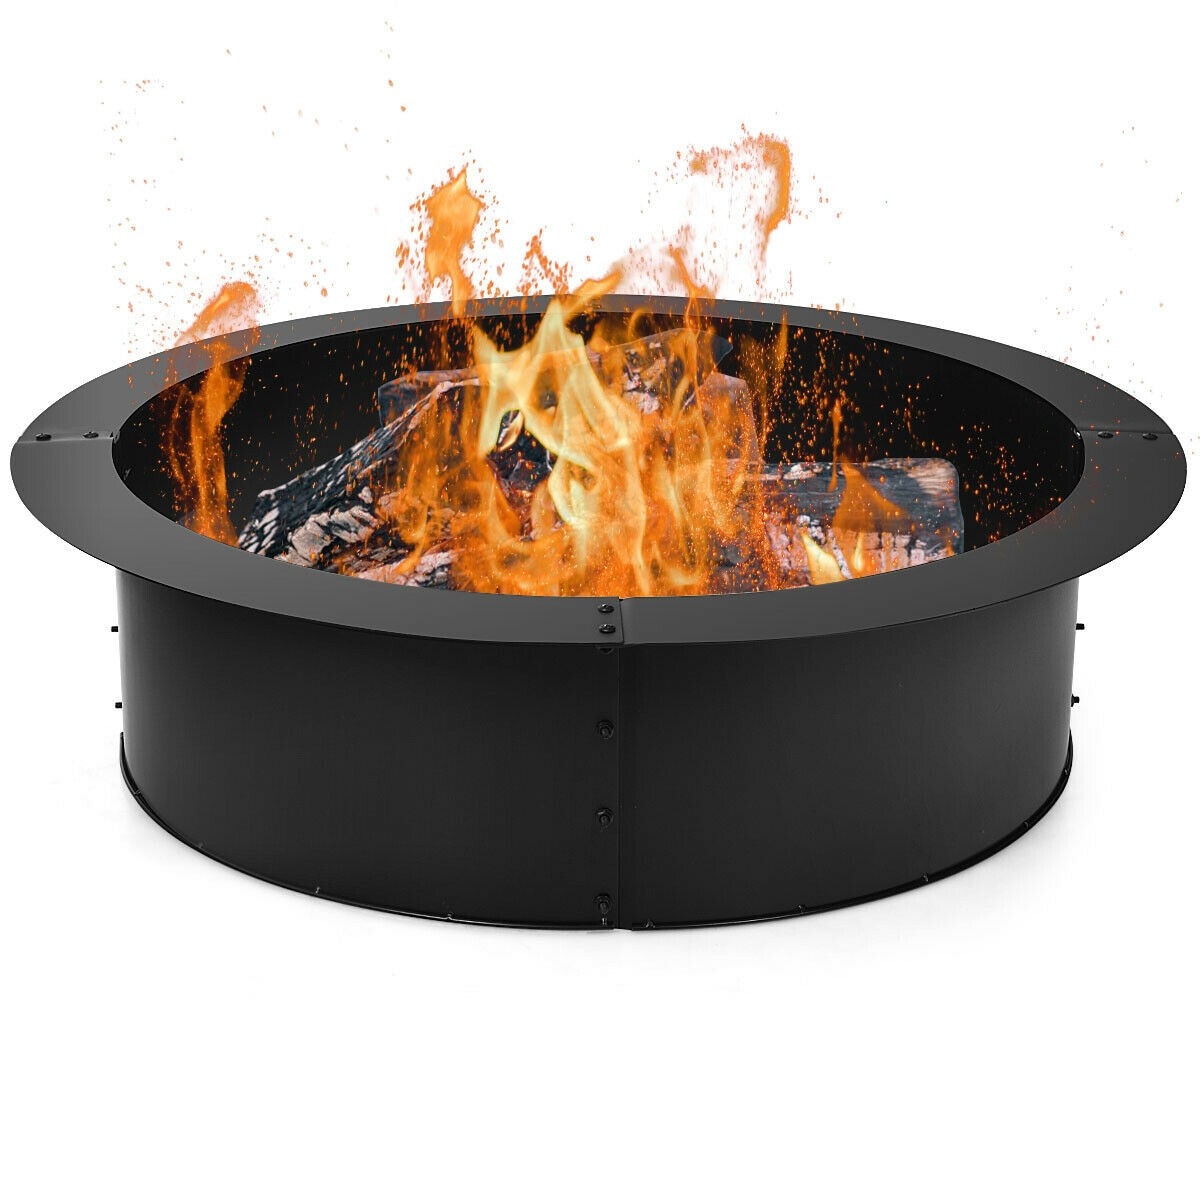 Fire Pit Ring Steel Large Camping Heavy Duty In Ground Portable Outdoor Backyard 